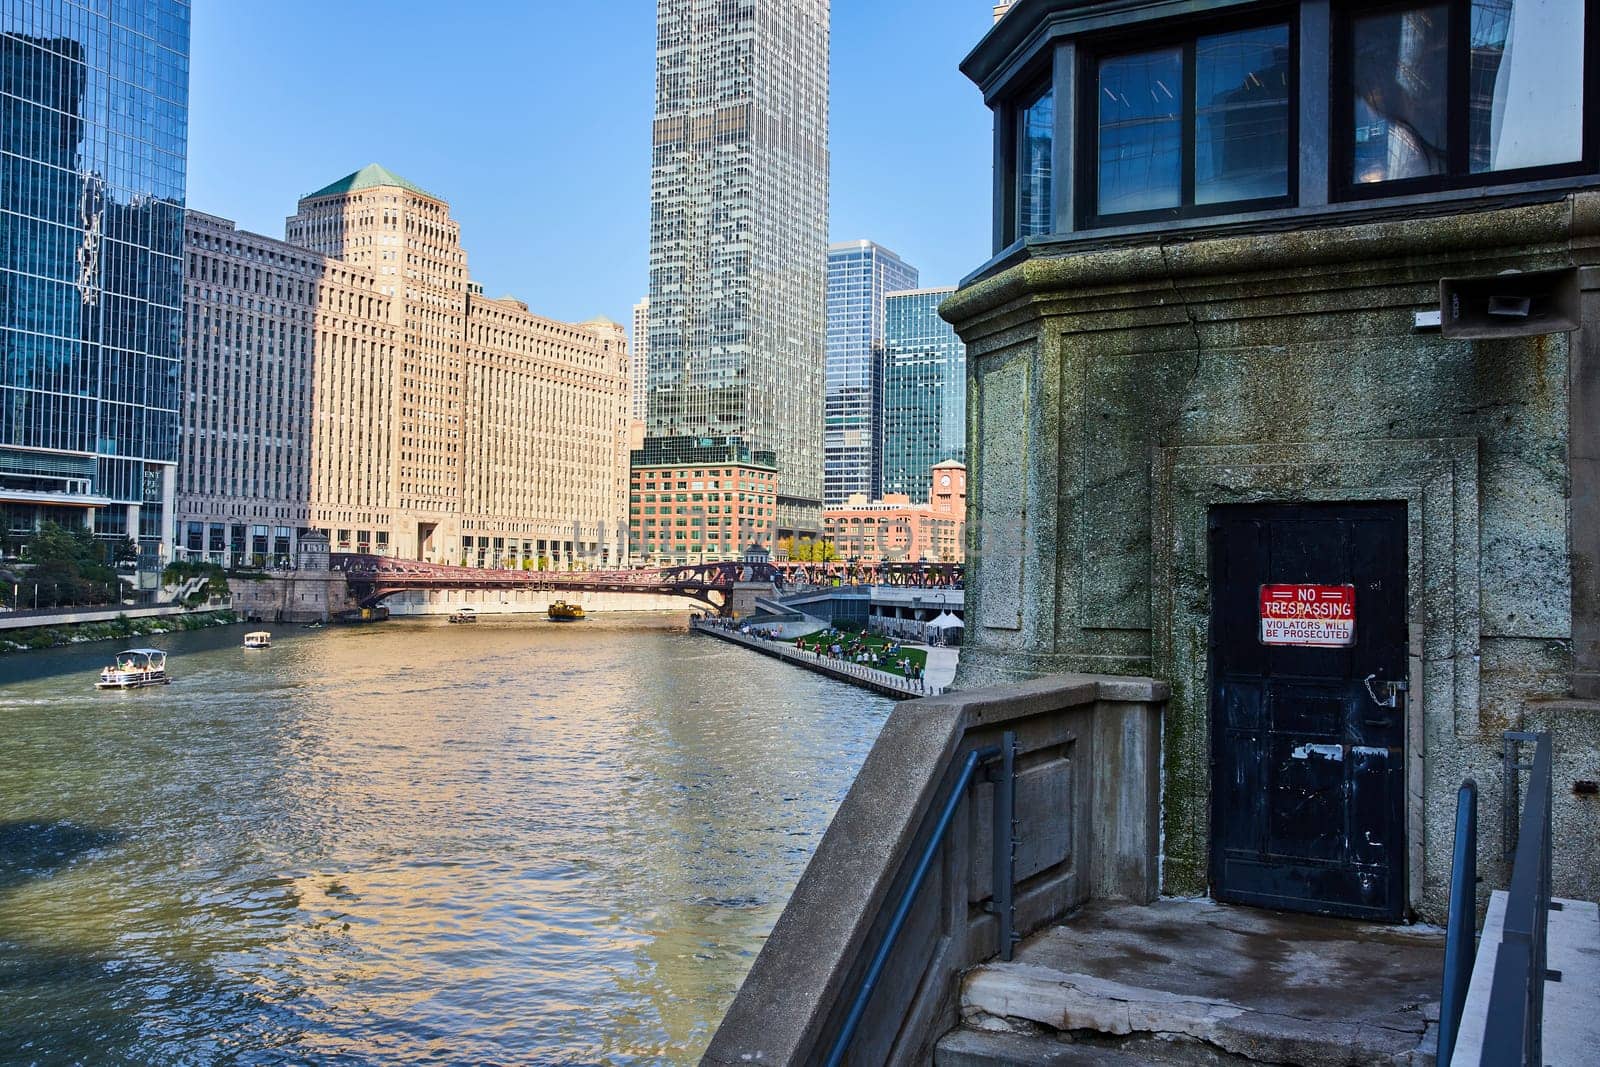 Image of No trespassing door on castle like tower overlooking Chicago canal with boats on water on sunny day